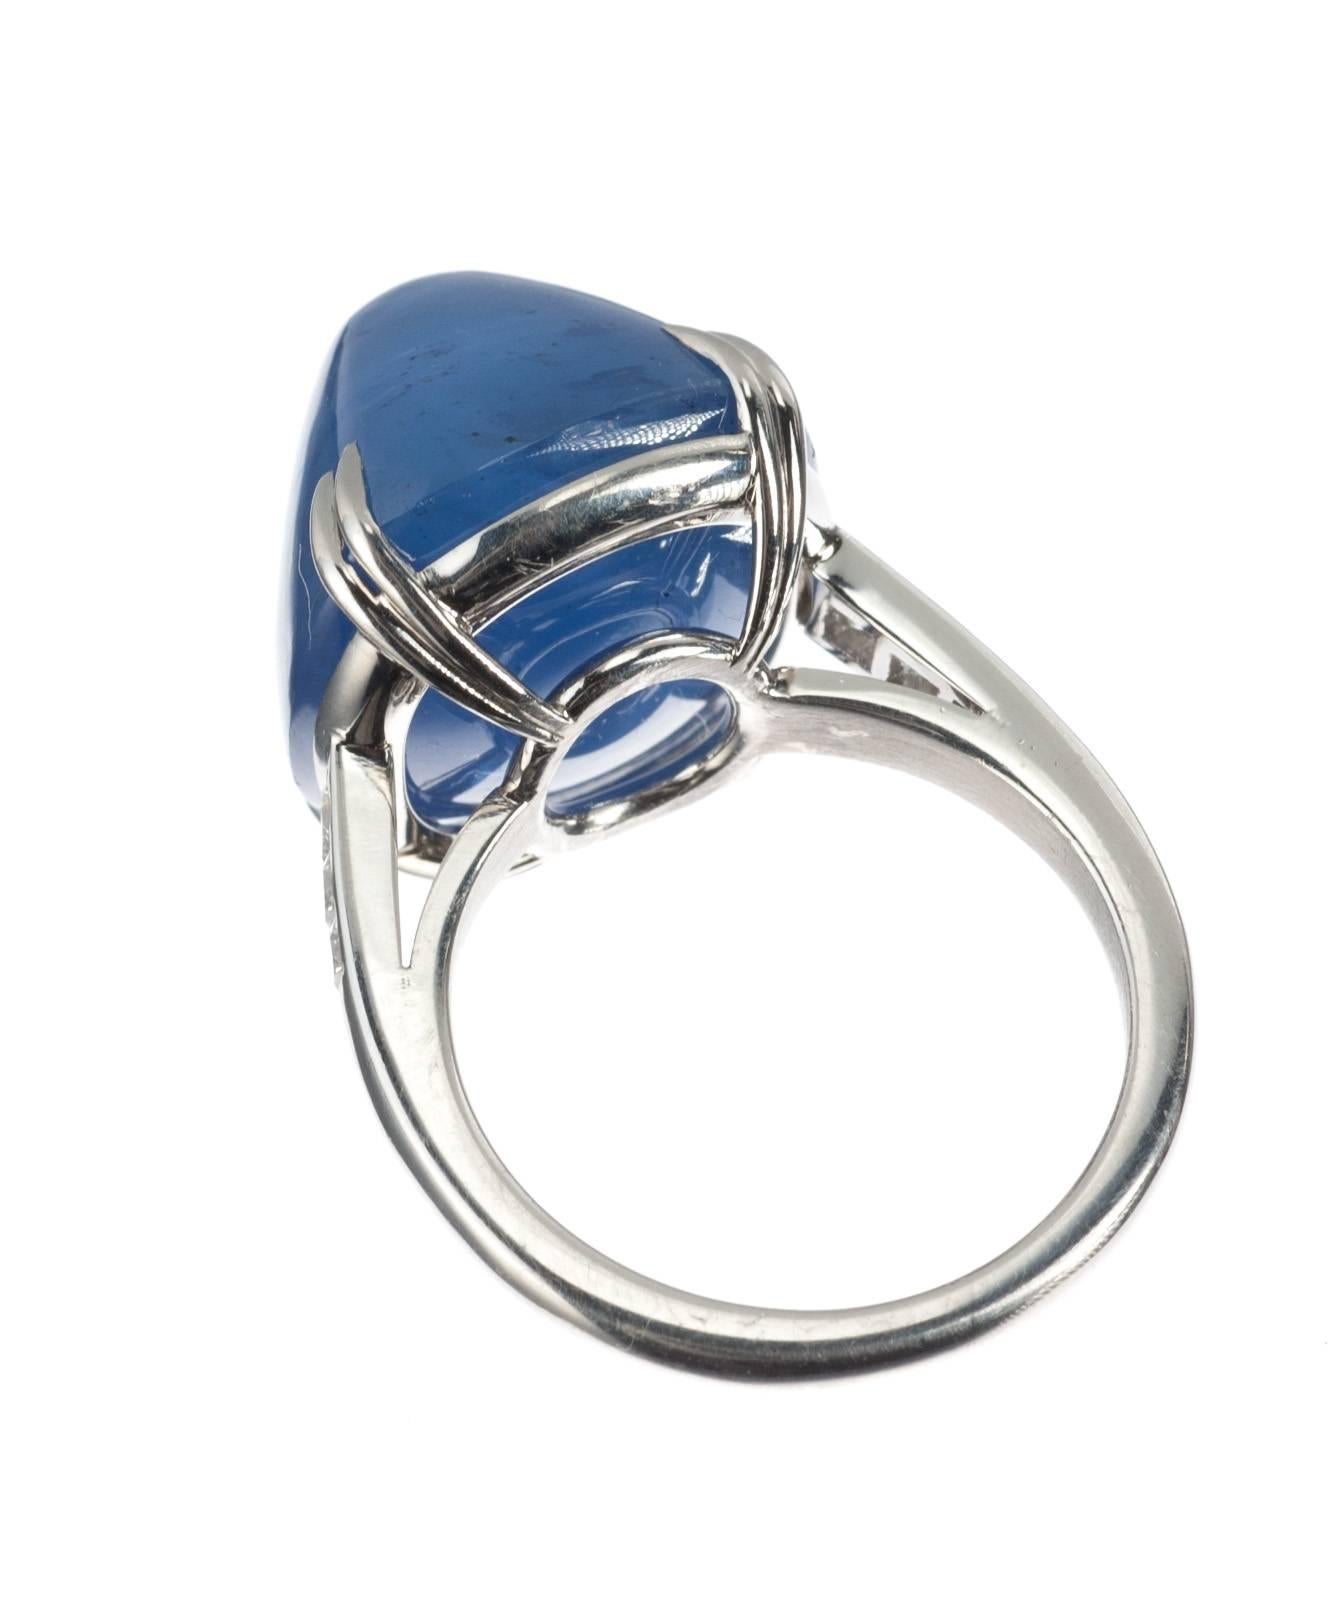 Lucie Campbell Sugarloaf-Cut Sapphire Diamond Platinum Ring For Sale at ...